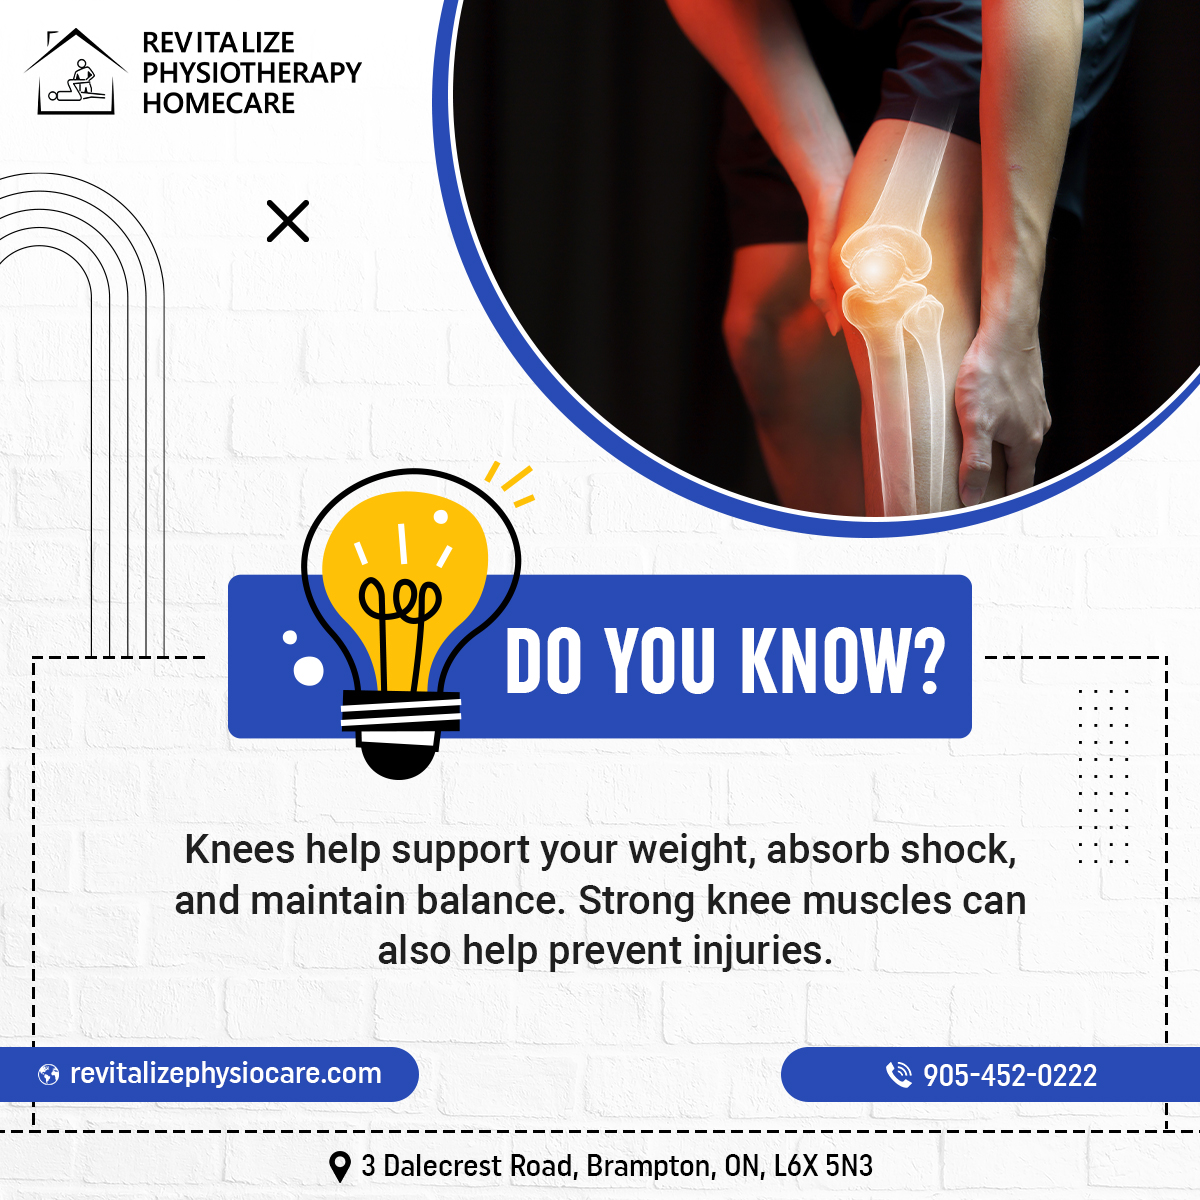 The muscles around your knee joint play a vital role in keeping you mobile and healthy. 

#RevitalizePhysiocare #mobilephysiotherapy #mississauga #brampton #bramptonphysiotherapist #physiotherapyathome #physiotherapy #muscle #wellness #healthfacts #kneemuscles #doyouknowfacts